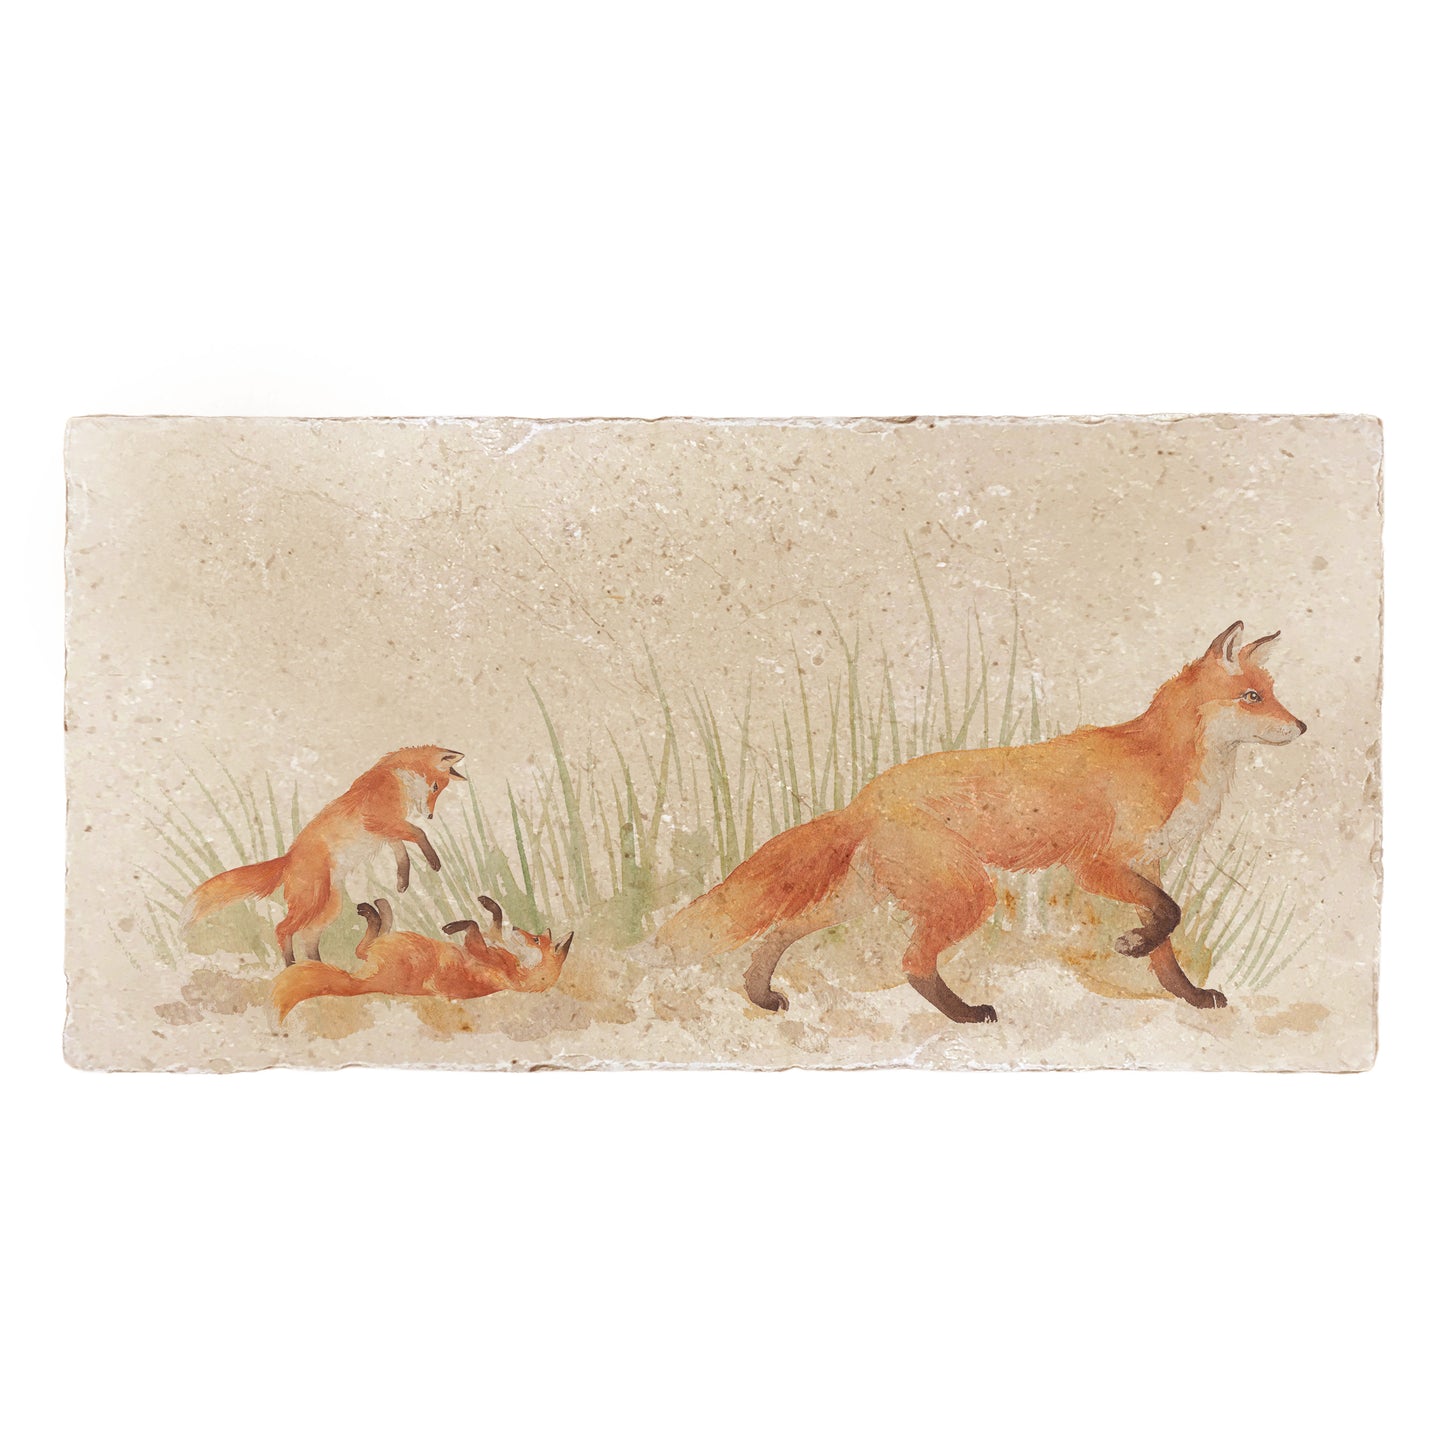 A rectangular cream marble sharing platter, featuring a watercolour design of a fox with two fox cubs playing in grass.